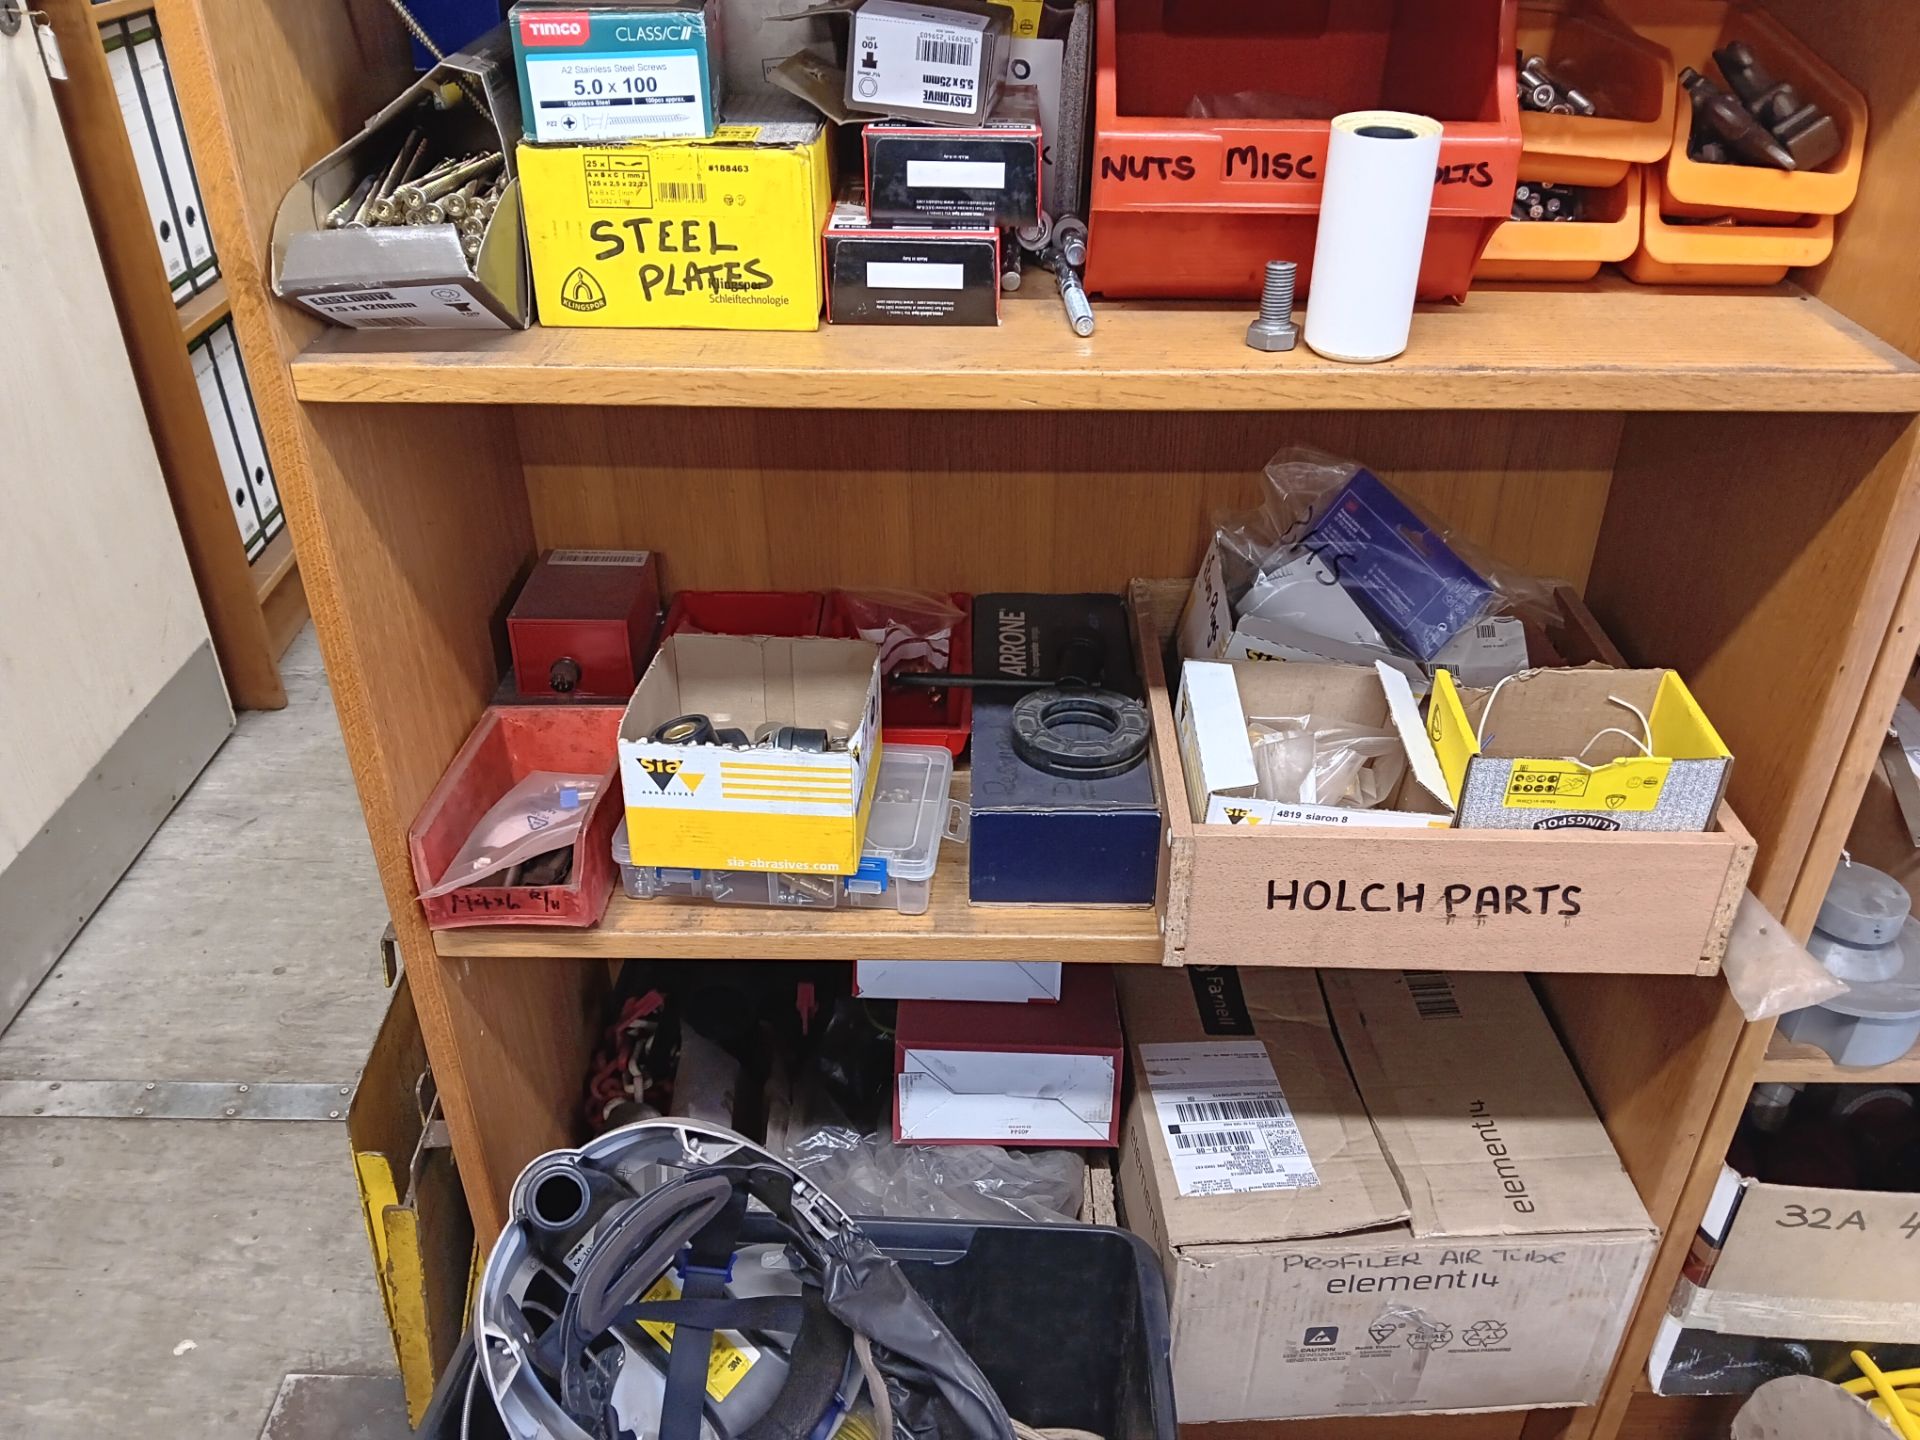 Contents of book shelf to include nuts, bolts, plates, screws etc. - Image 3 of 5